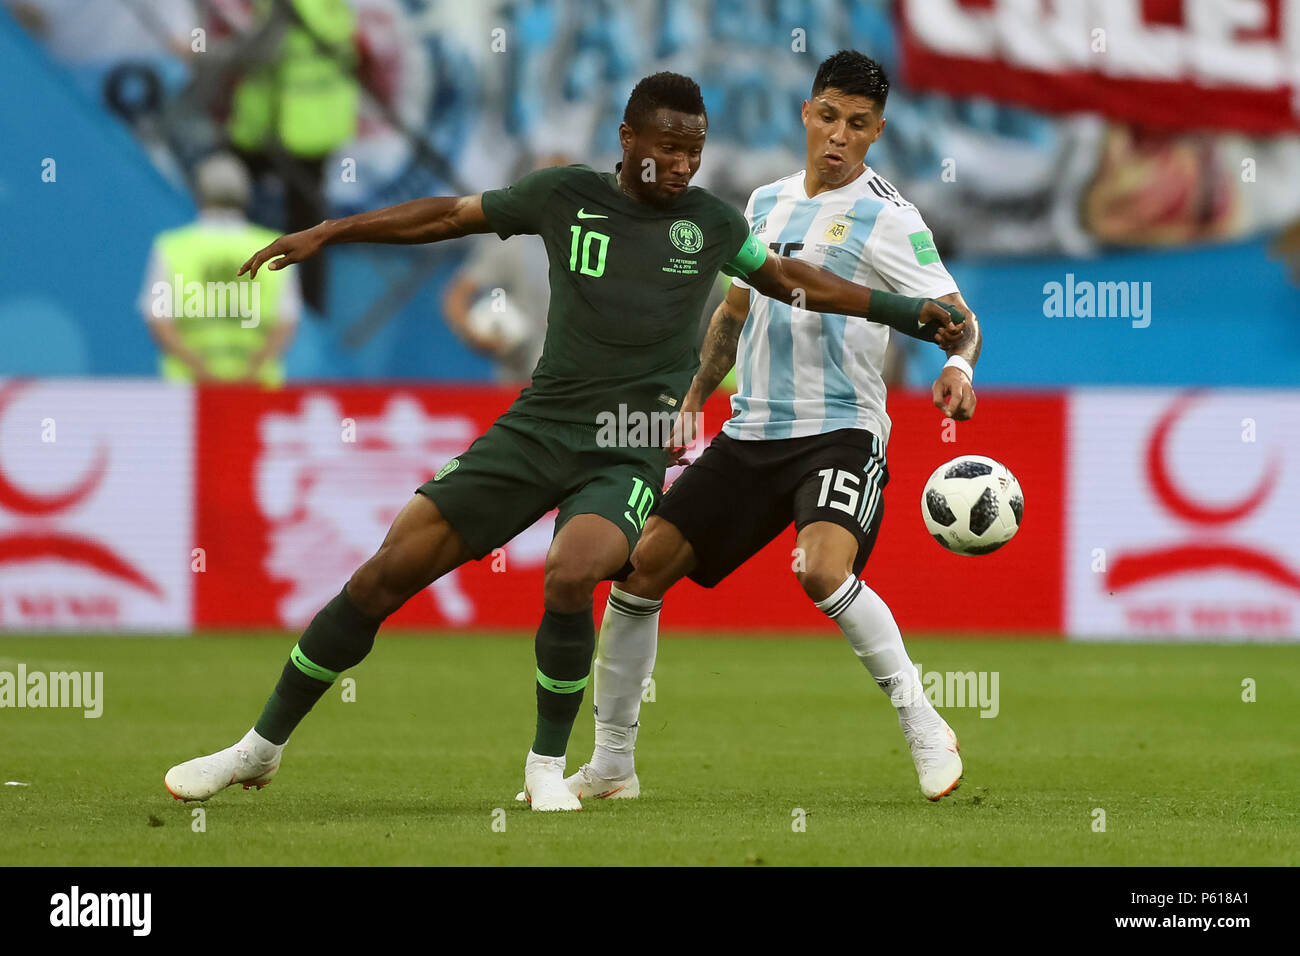 St Petersburg, Russia. 26th Jun, 2018. Mikel John Obi of Nigeria and Enzo Perez of Argentina during the 2018 FIFA World Cup Group D match between Nigeria and Argentina at Saint Petersburg Stadium on June 26th 2018 in Saint Petersburg, Russia. (Photo by Daniel Chesterton/phcimages.com) Credit: PHC Images/Alamy Live News Stock Photo